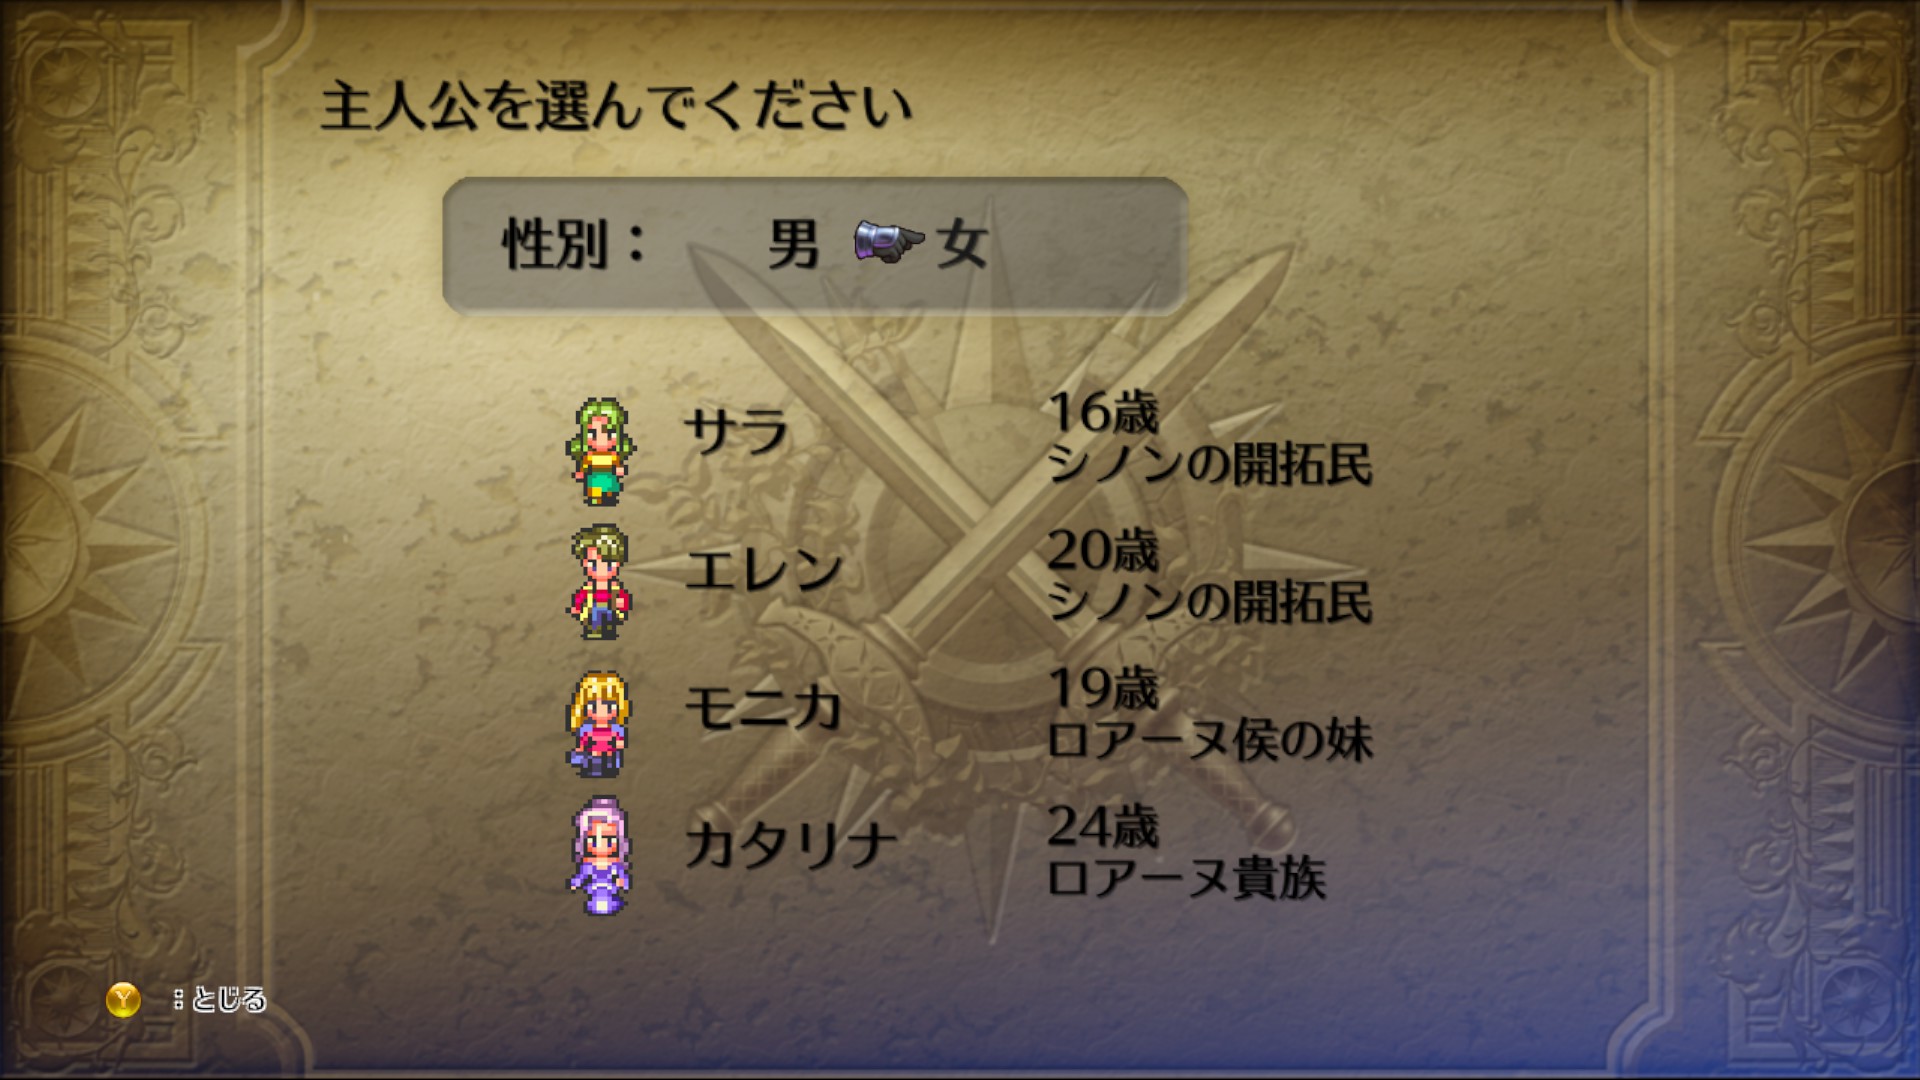 Character select screen showing four playable woman characters